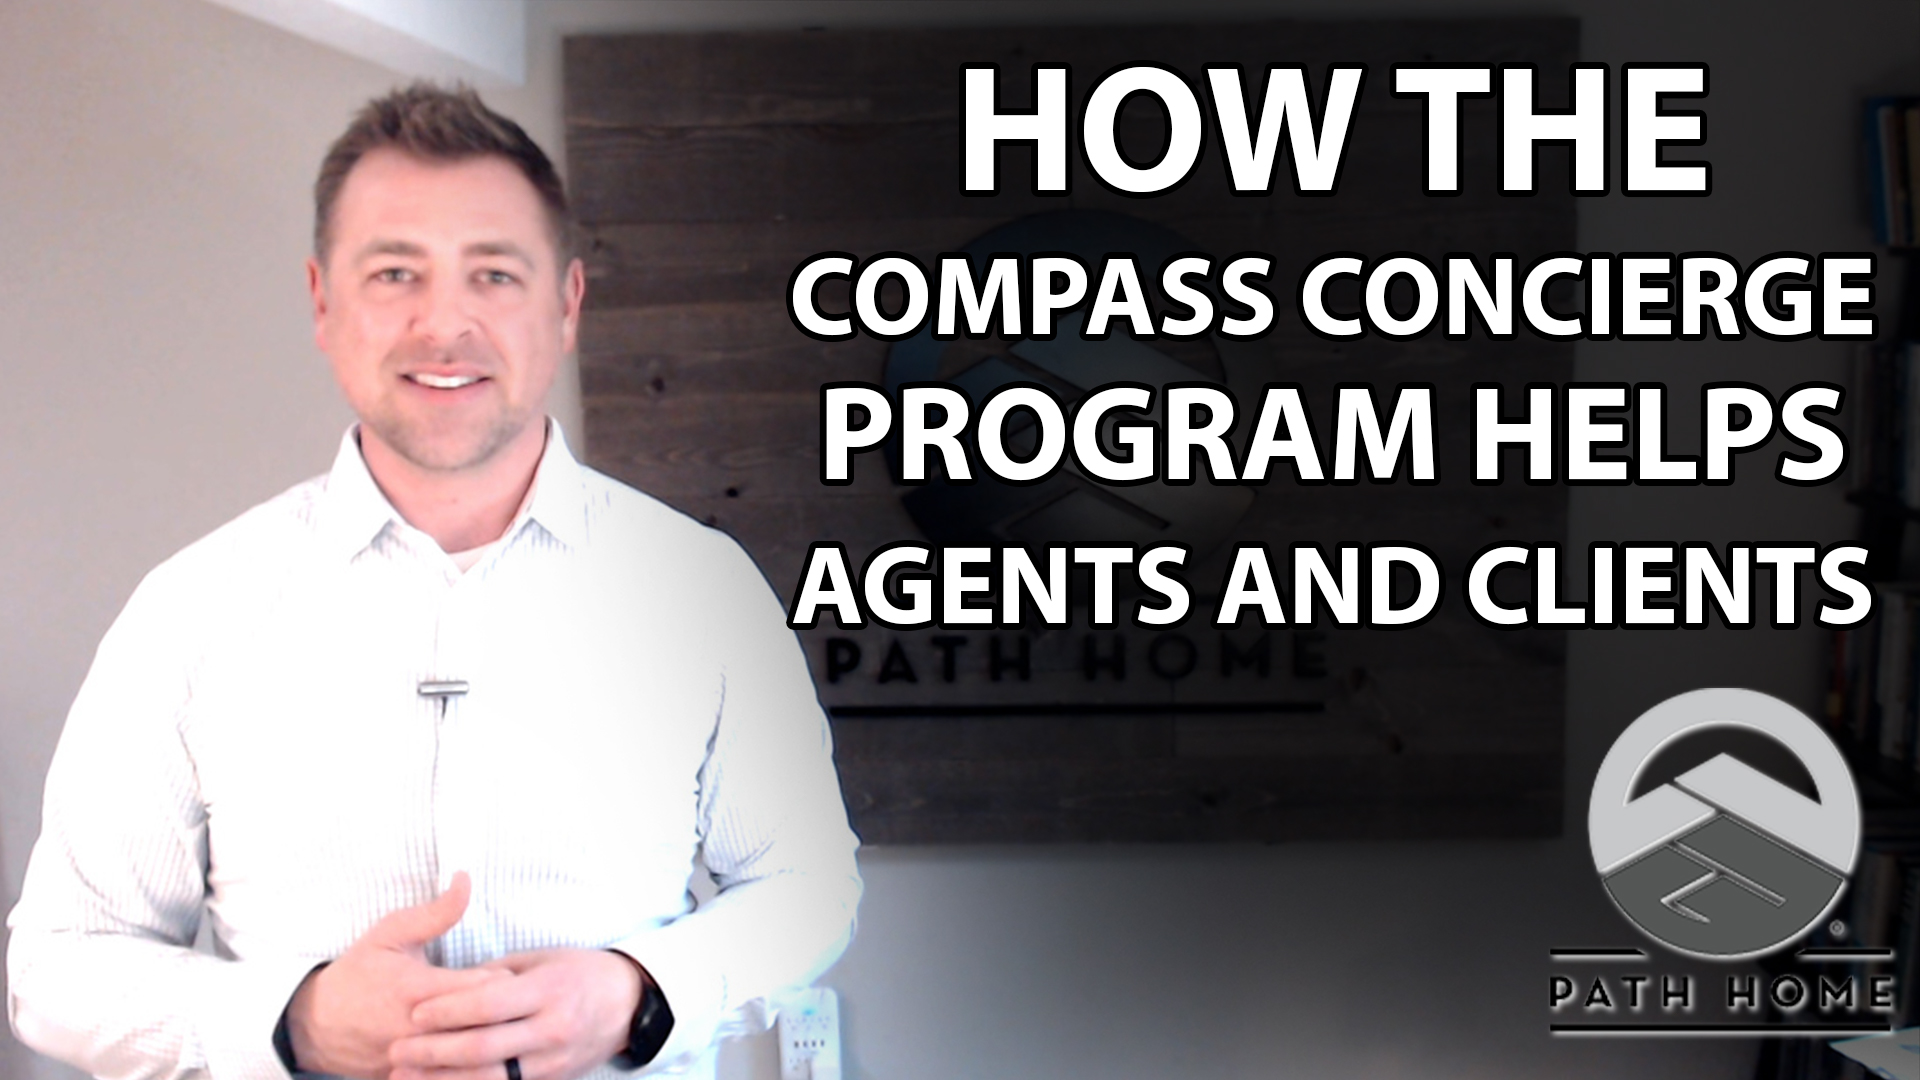 Net Your Clients More for Their Sale With the Compass Concierge Program